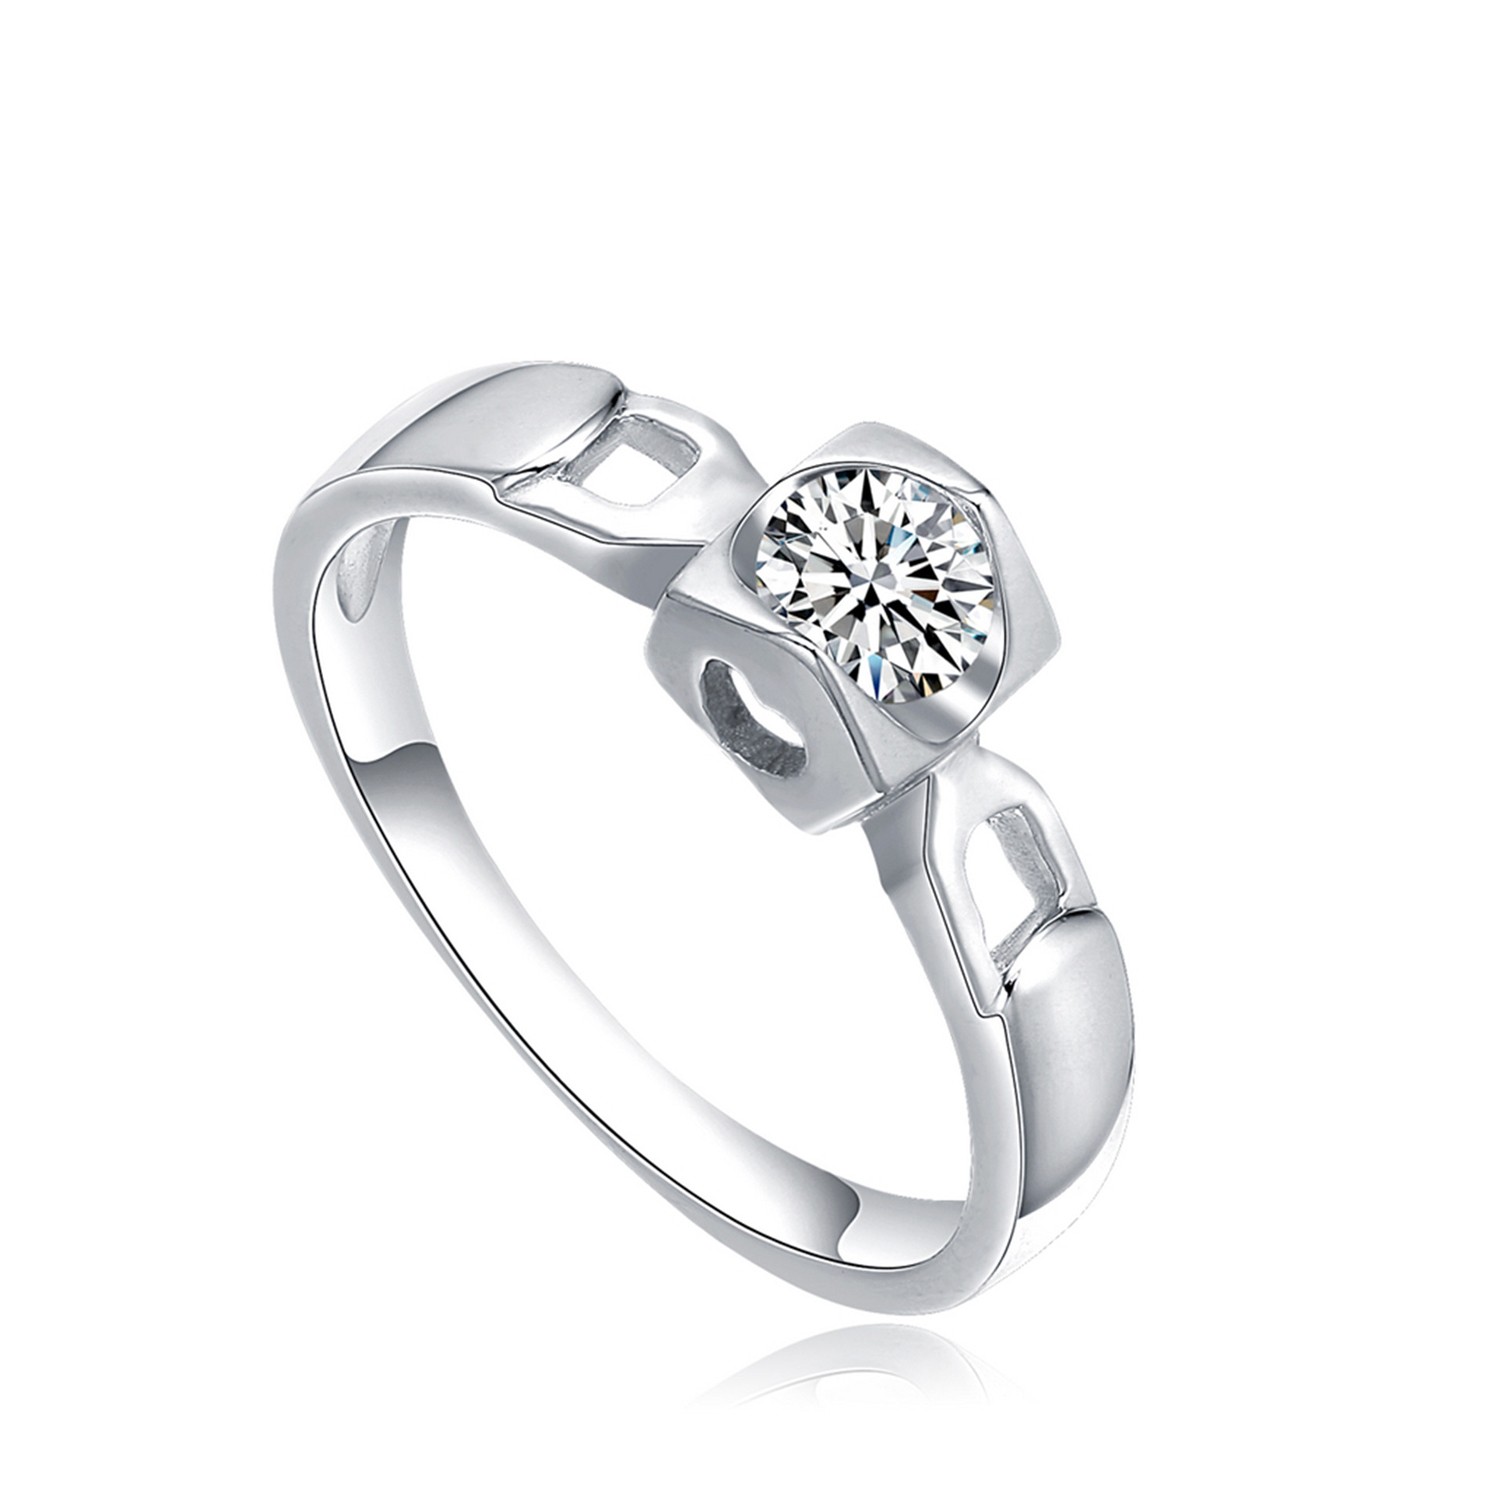 Fashionable silver ring, hollow heart and bright zircon complement each other